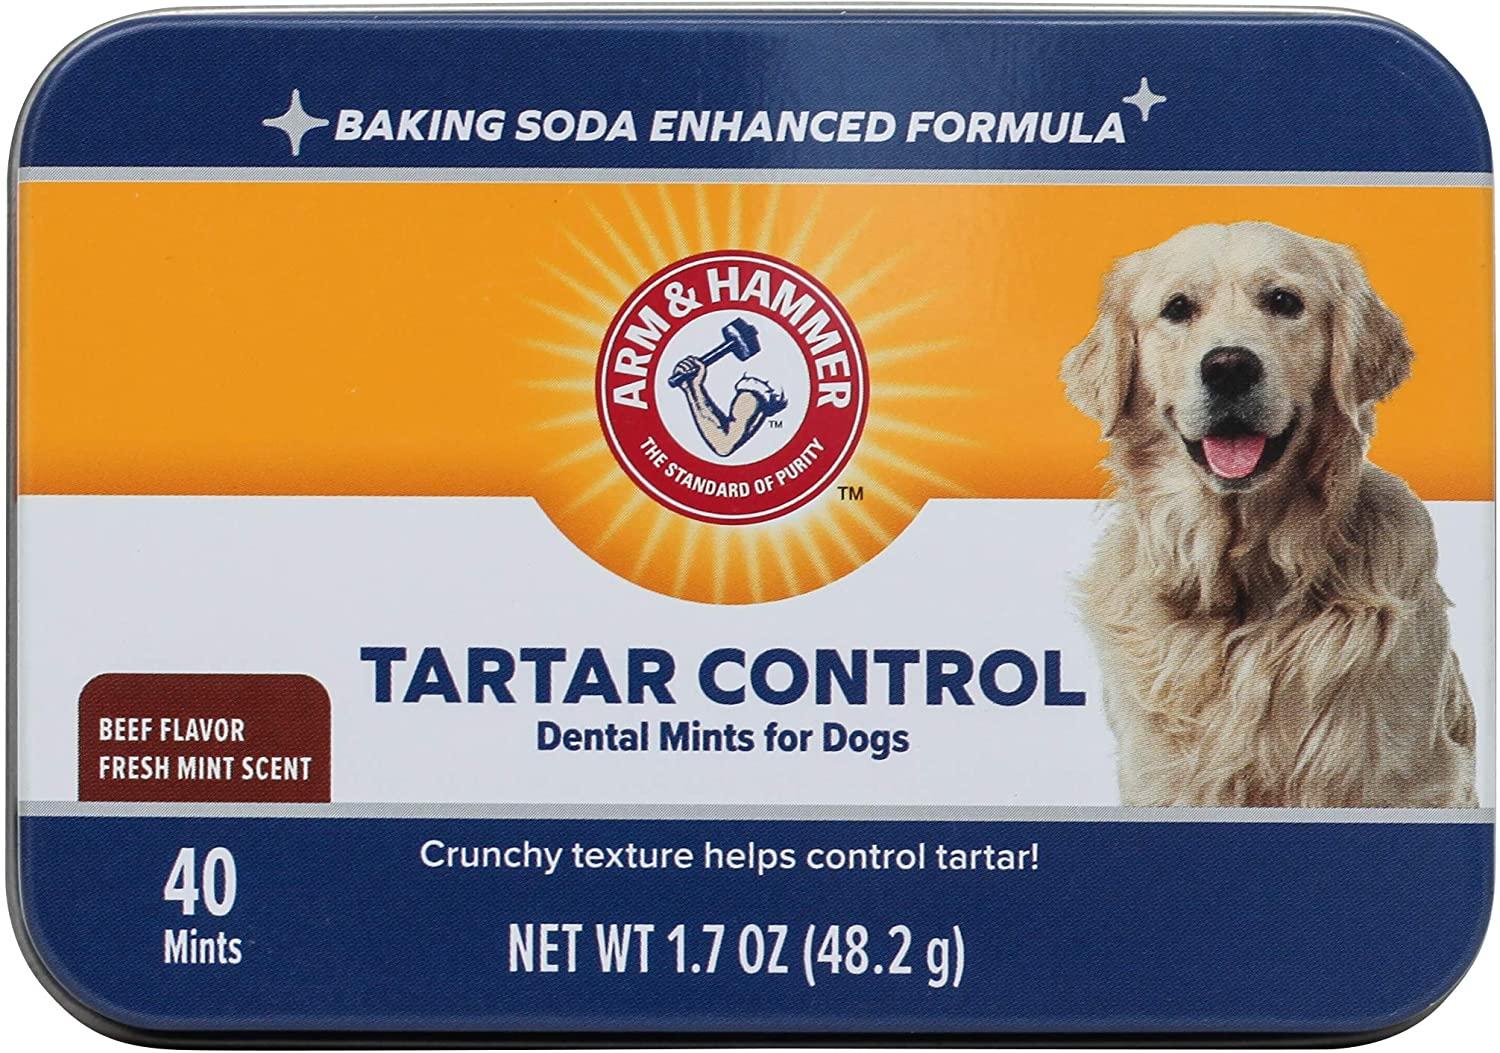 40 Arm and Hammer Dog Dental Care Fresh Breath Mints for $1.81